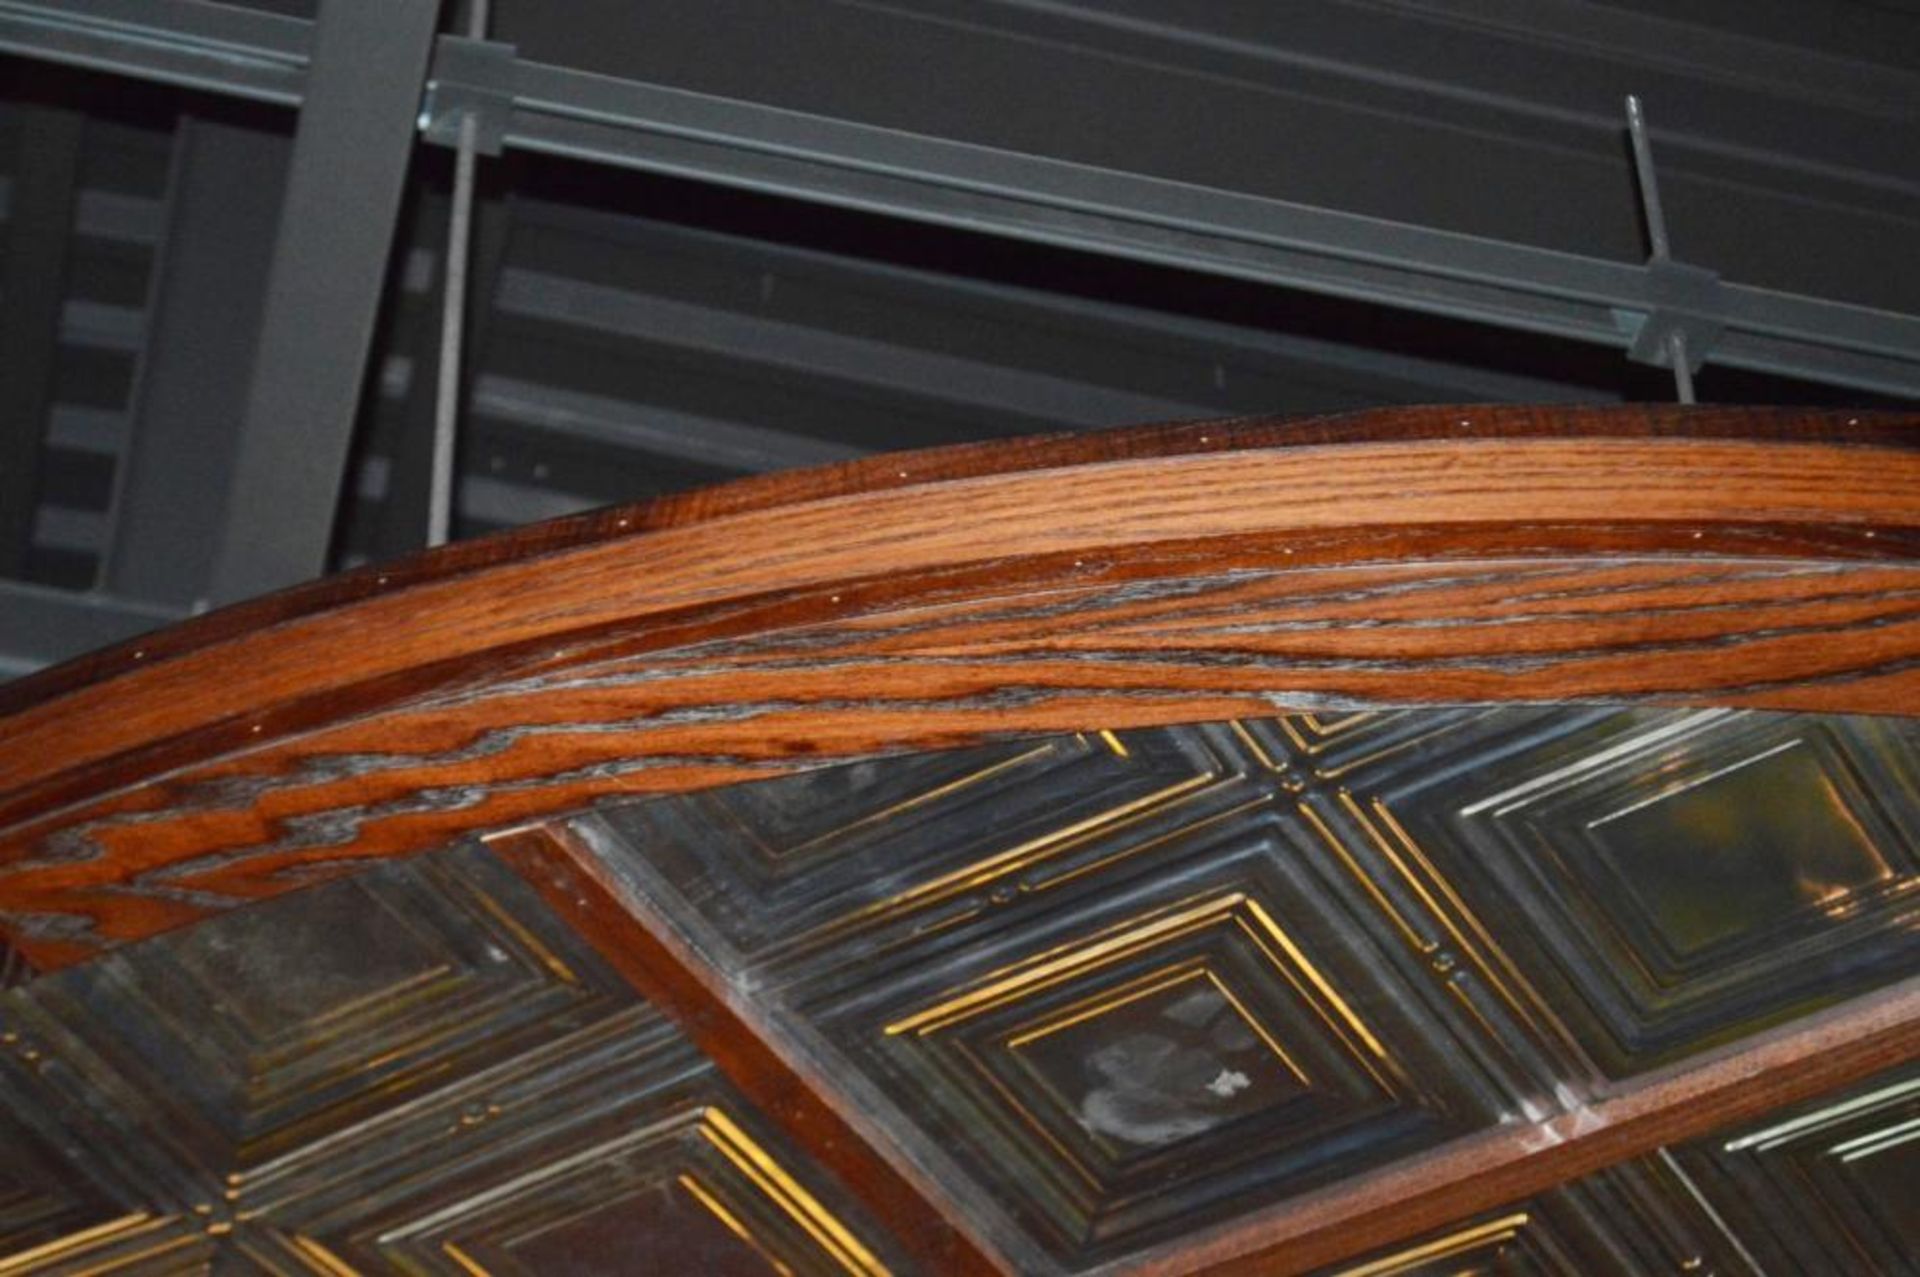 1 x Bespoke Suspended Round Ceiling Panel in Dark Wood With Glass Inserts - Approx 3 Meter - Image 4 of 6